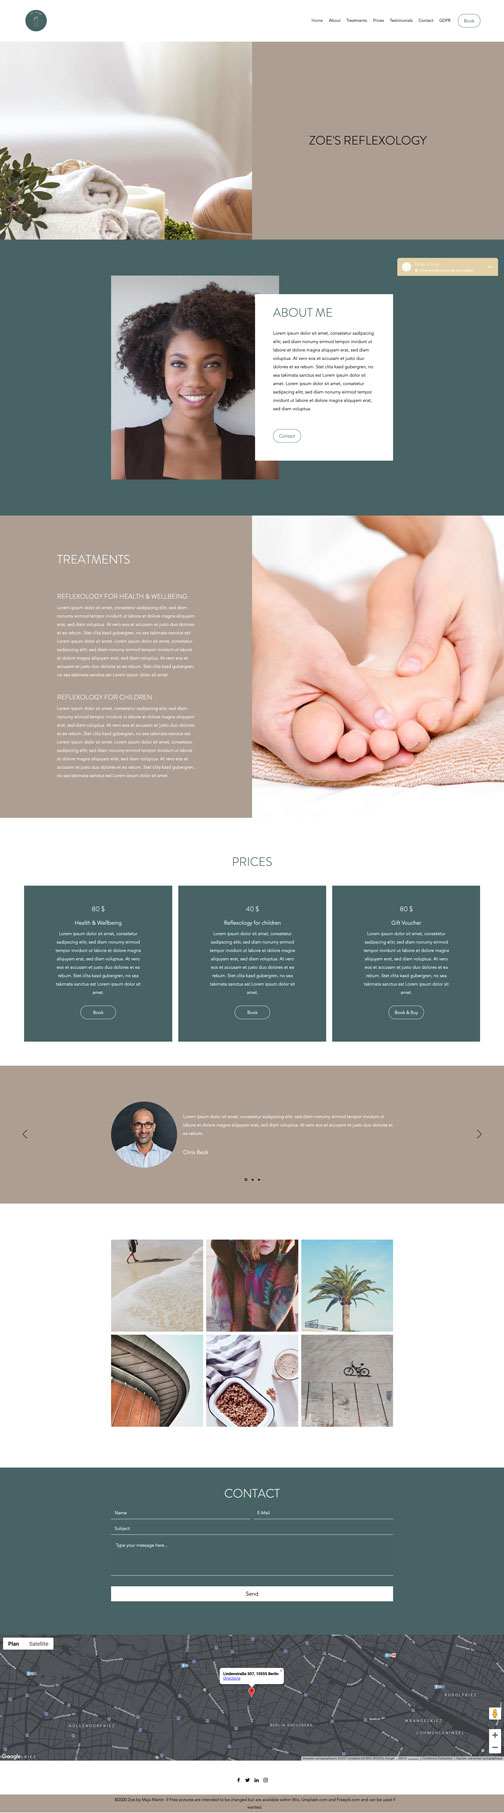 Wix Template for Practitioners